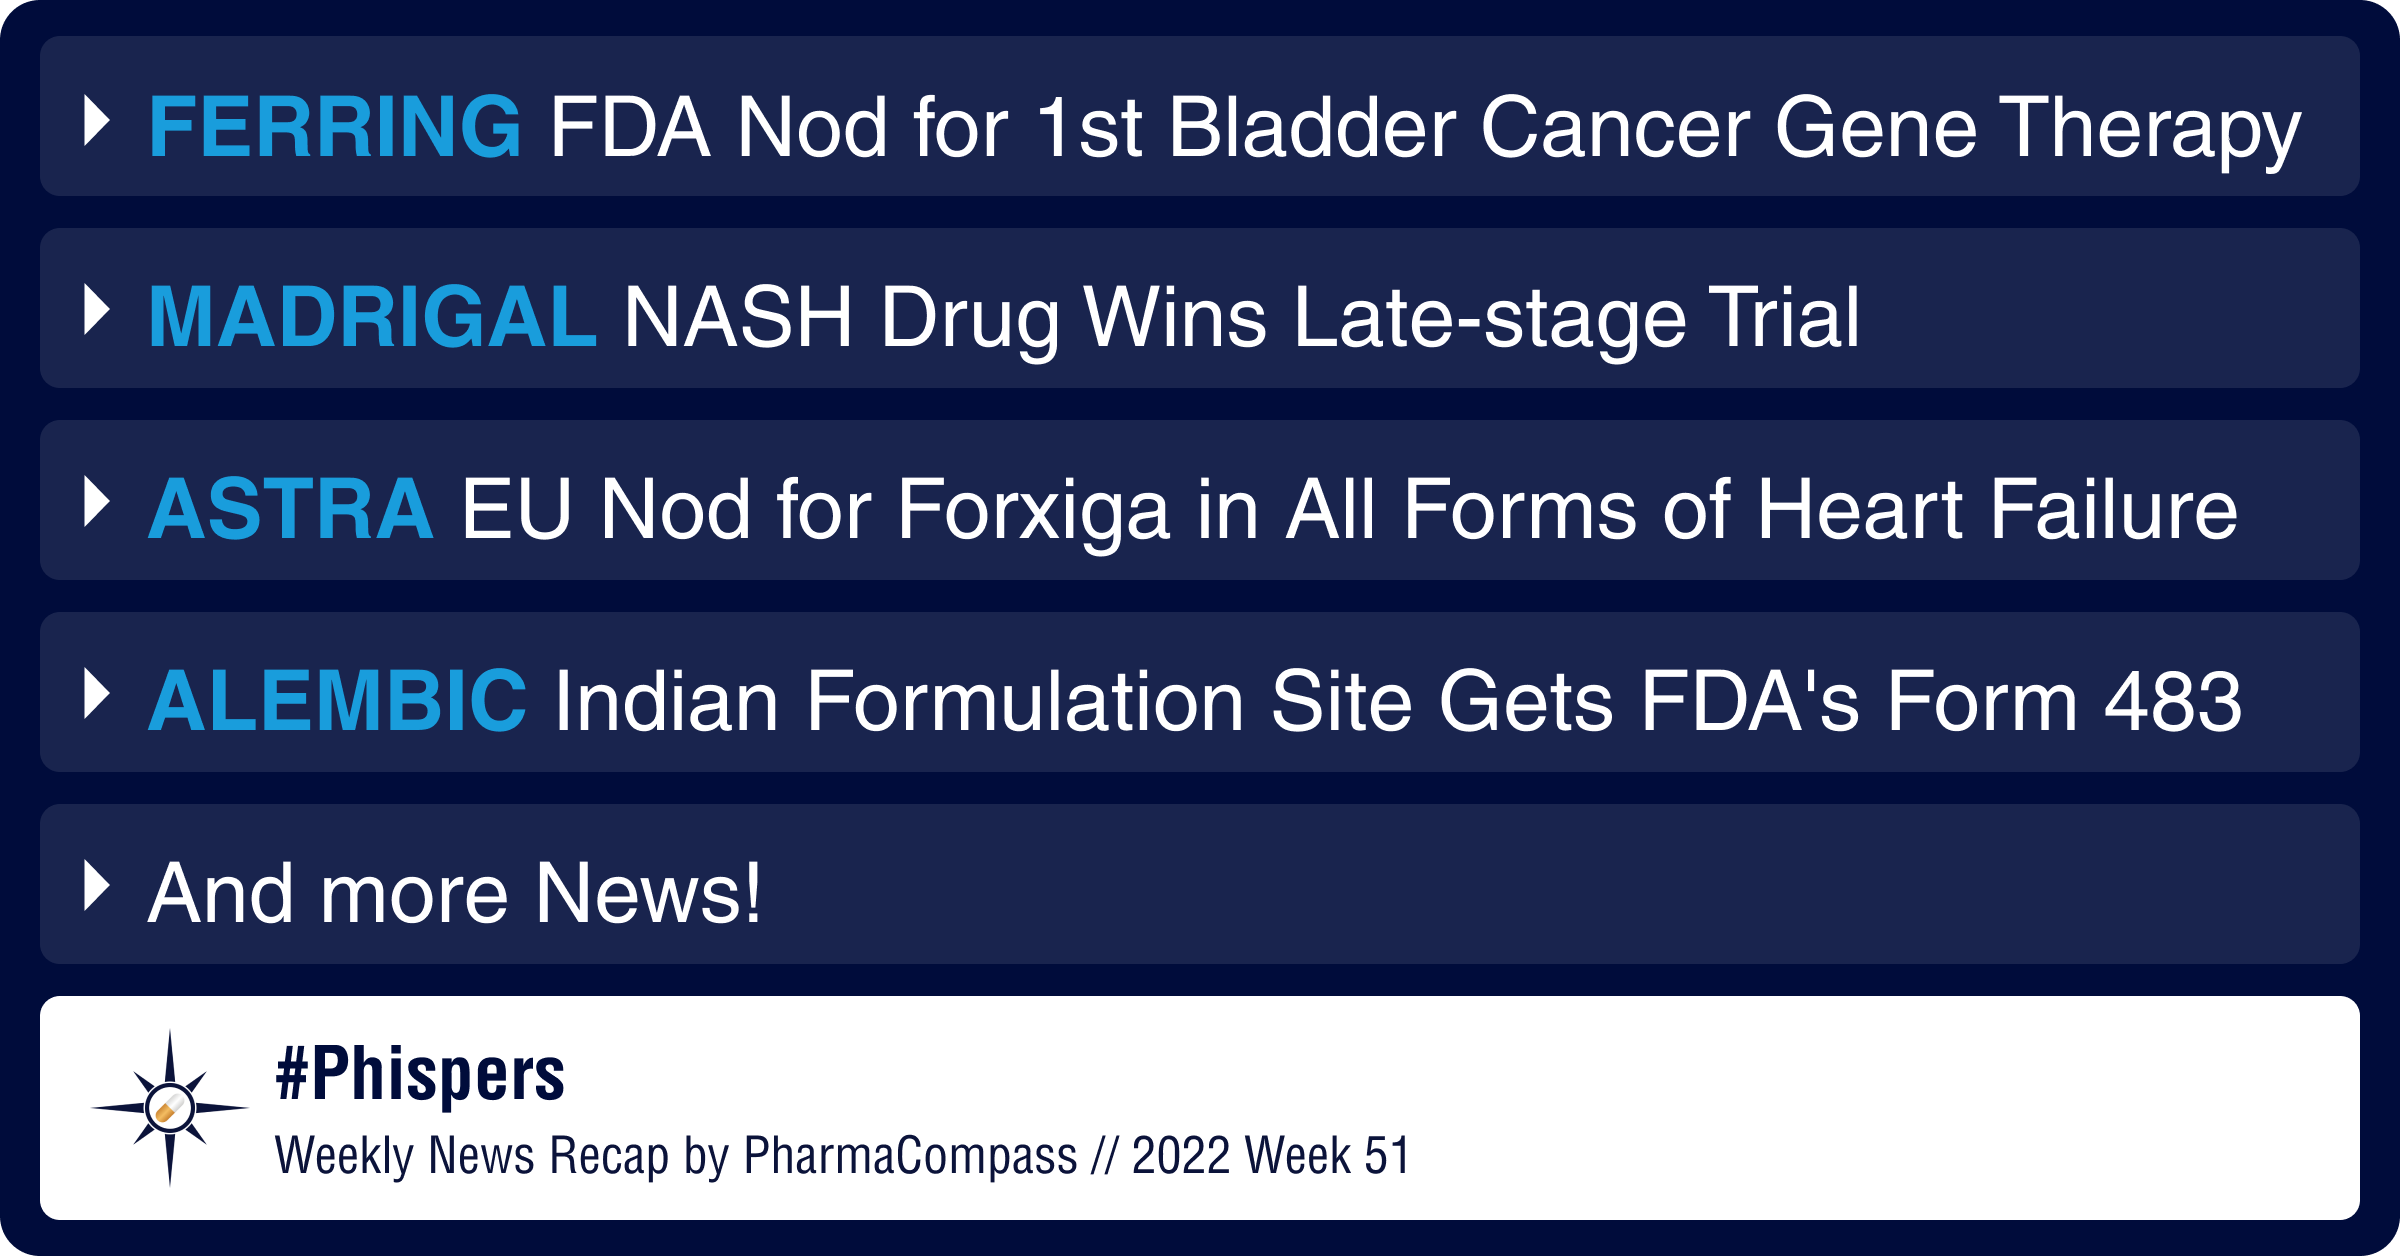 India’s drug prices rise due to China’s Covid crisis; Ferring’s gene therapy becomes 1st bladder cancer med in US